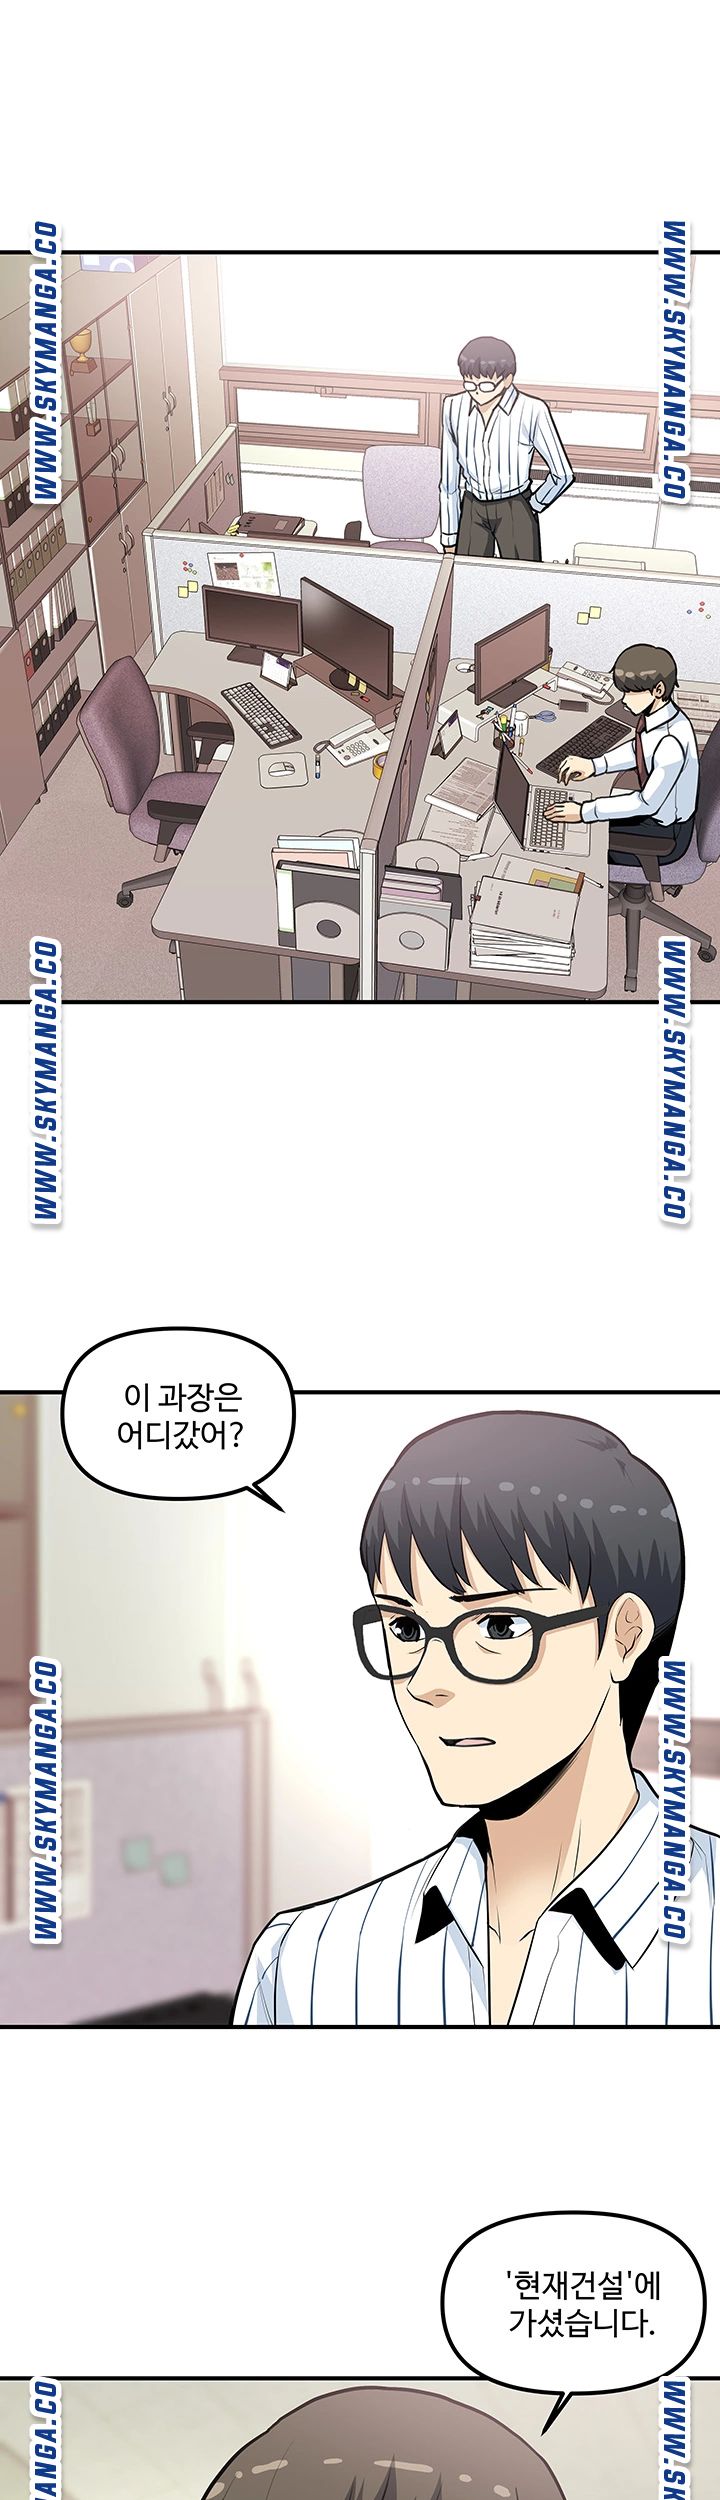 Office Bible Raw - Chapter 25 Page 7